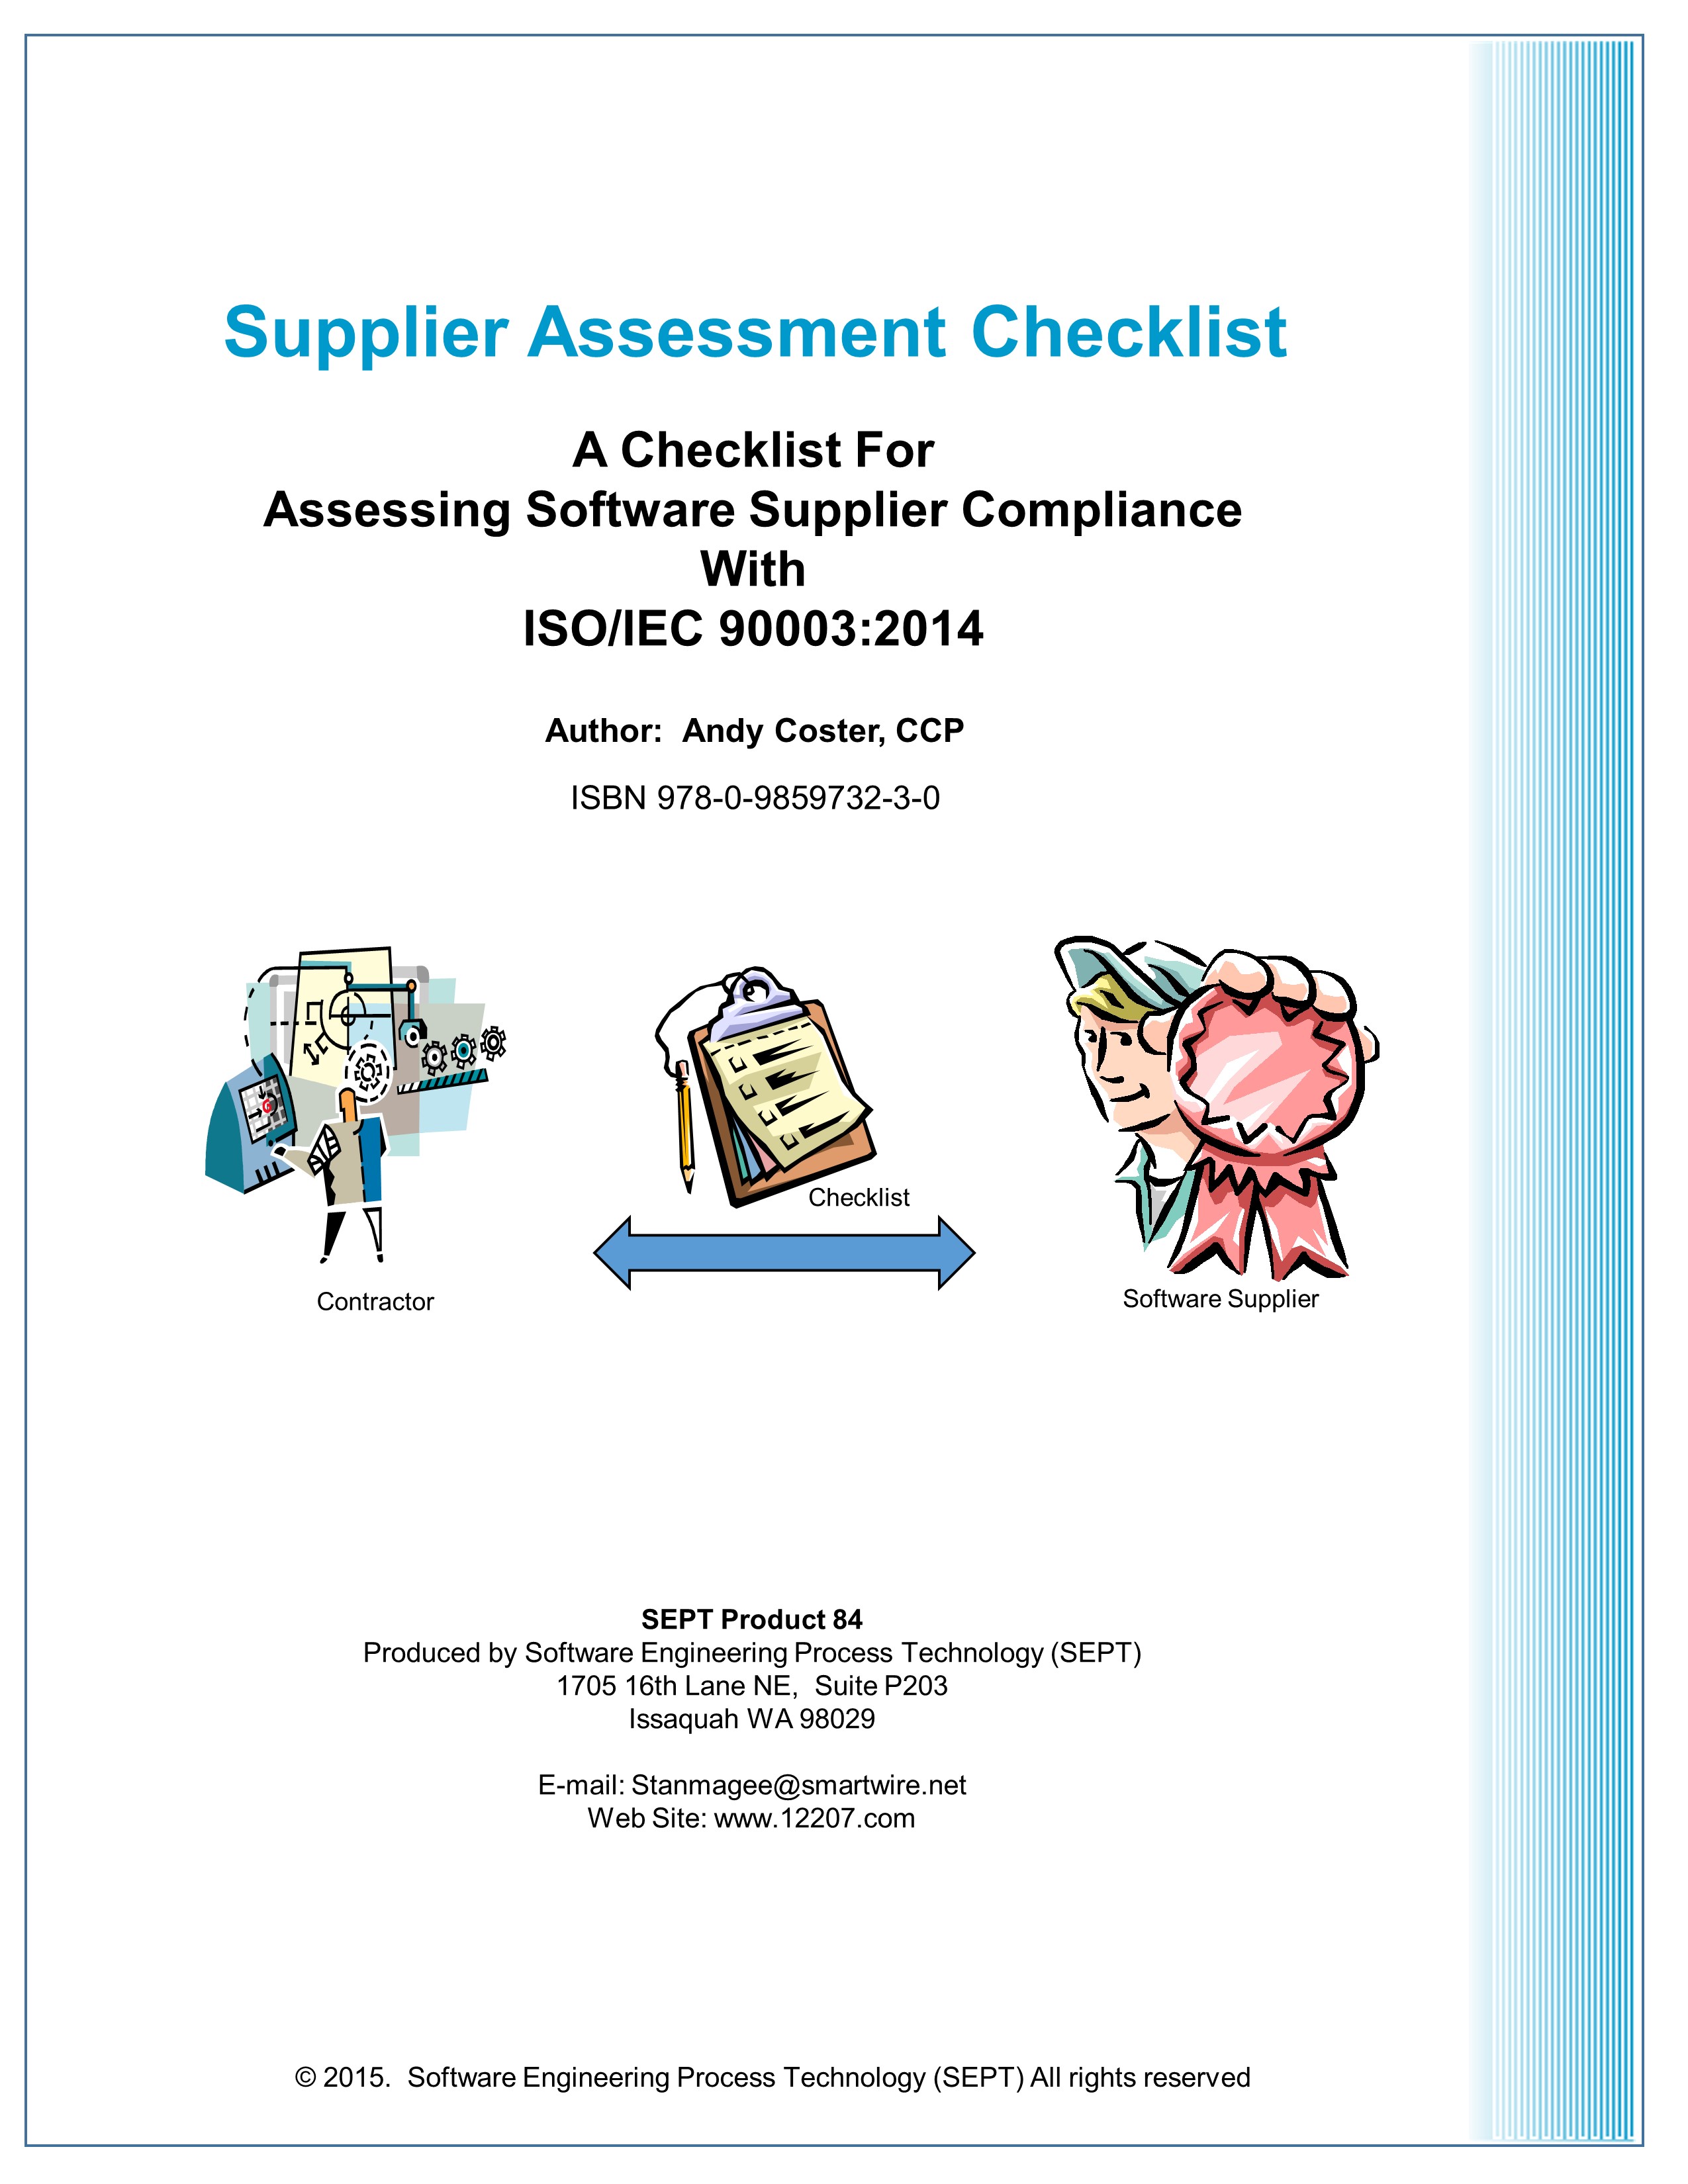 A Checklist for Assessing Software Supplier Compliance with ISO/IEC 90003:2014 